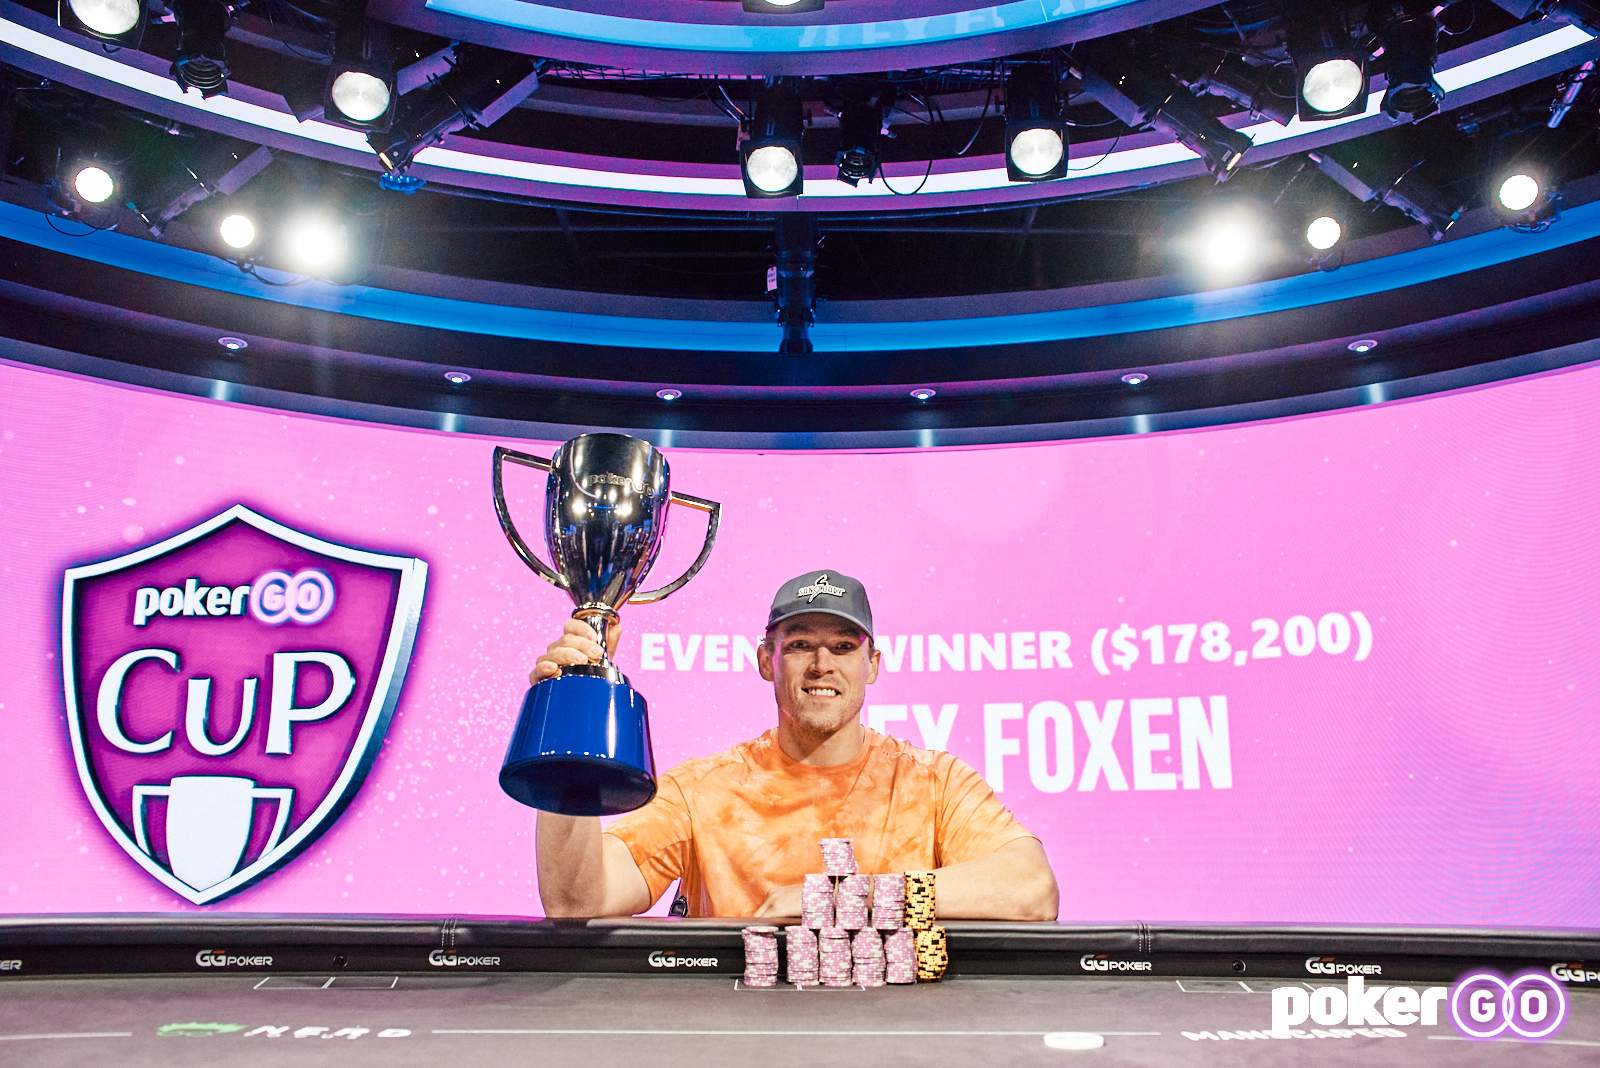 Alex Foxen Wins First Event of Inaugural PokerGO Cup for $178,200